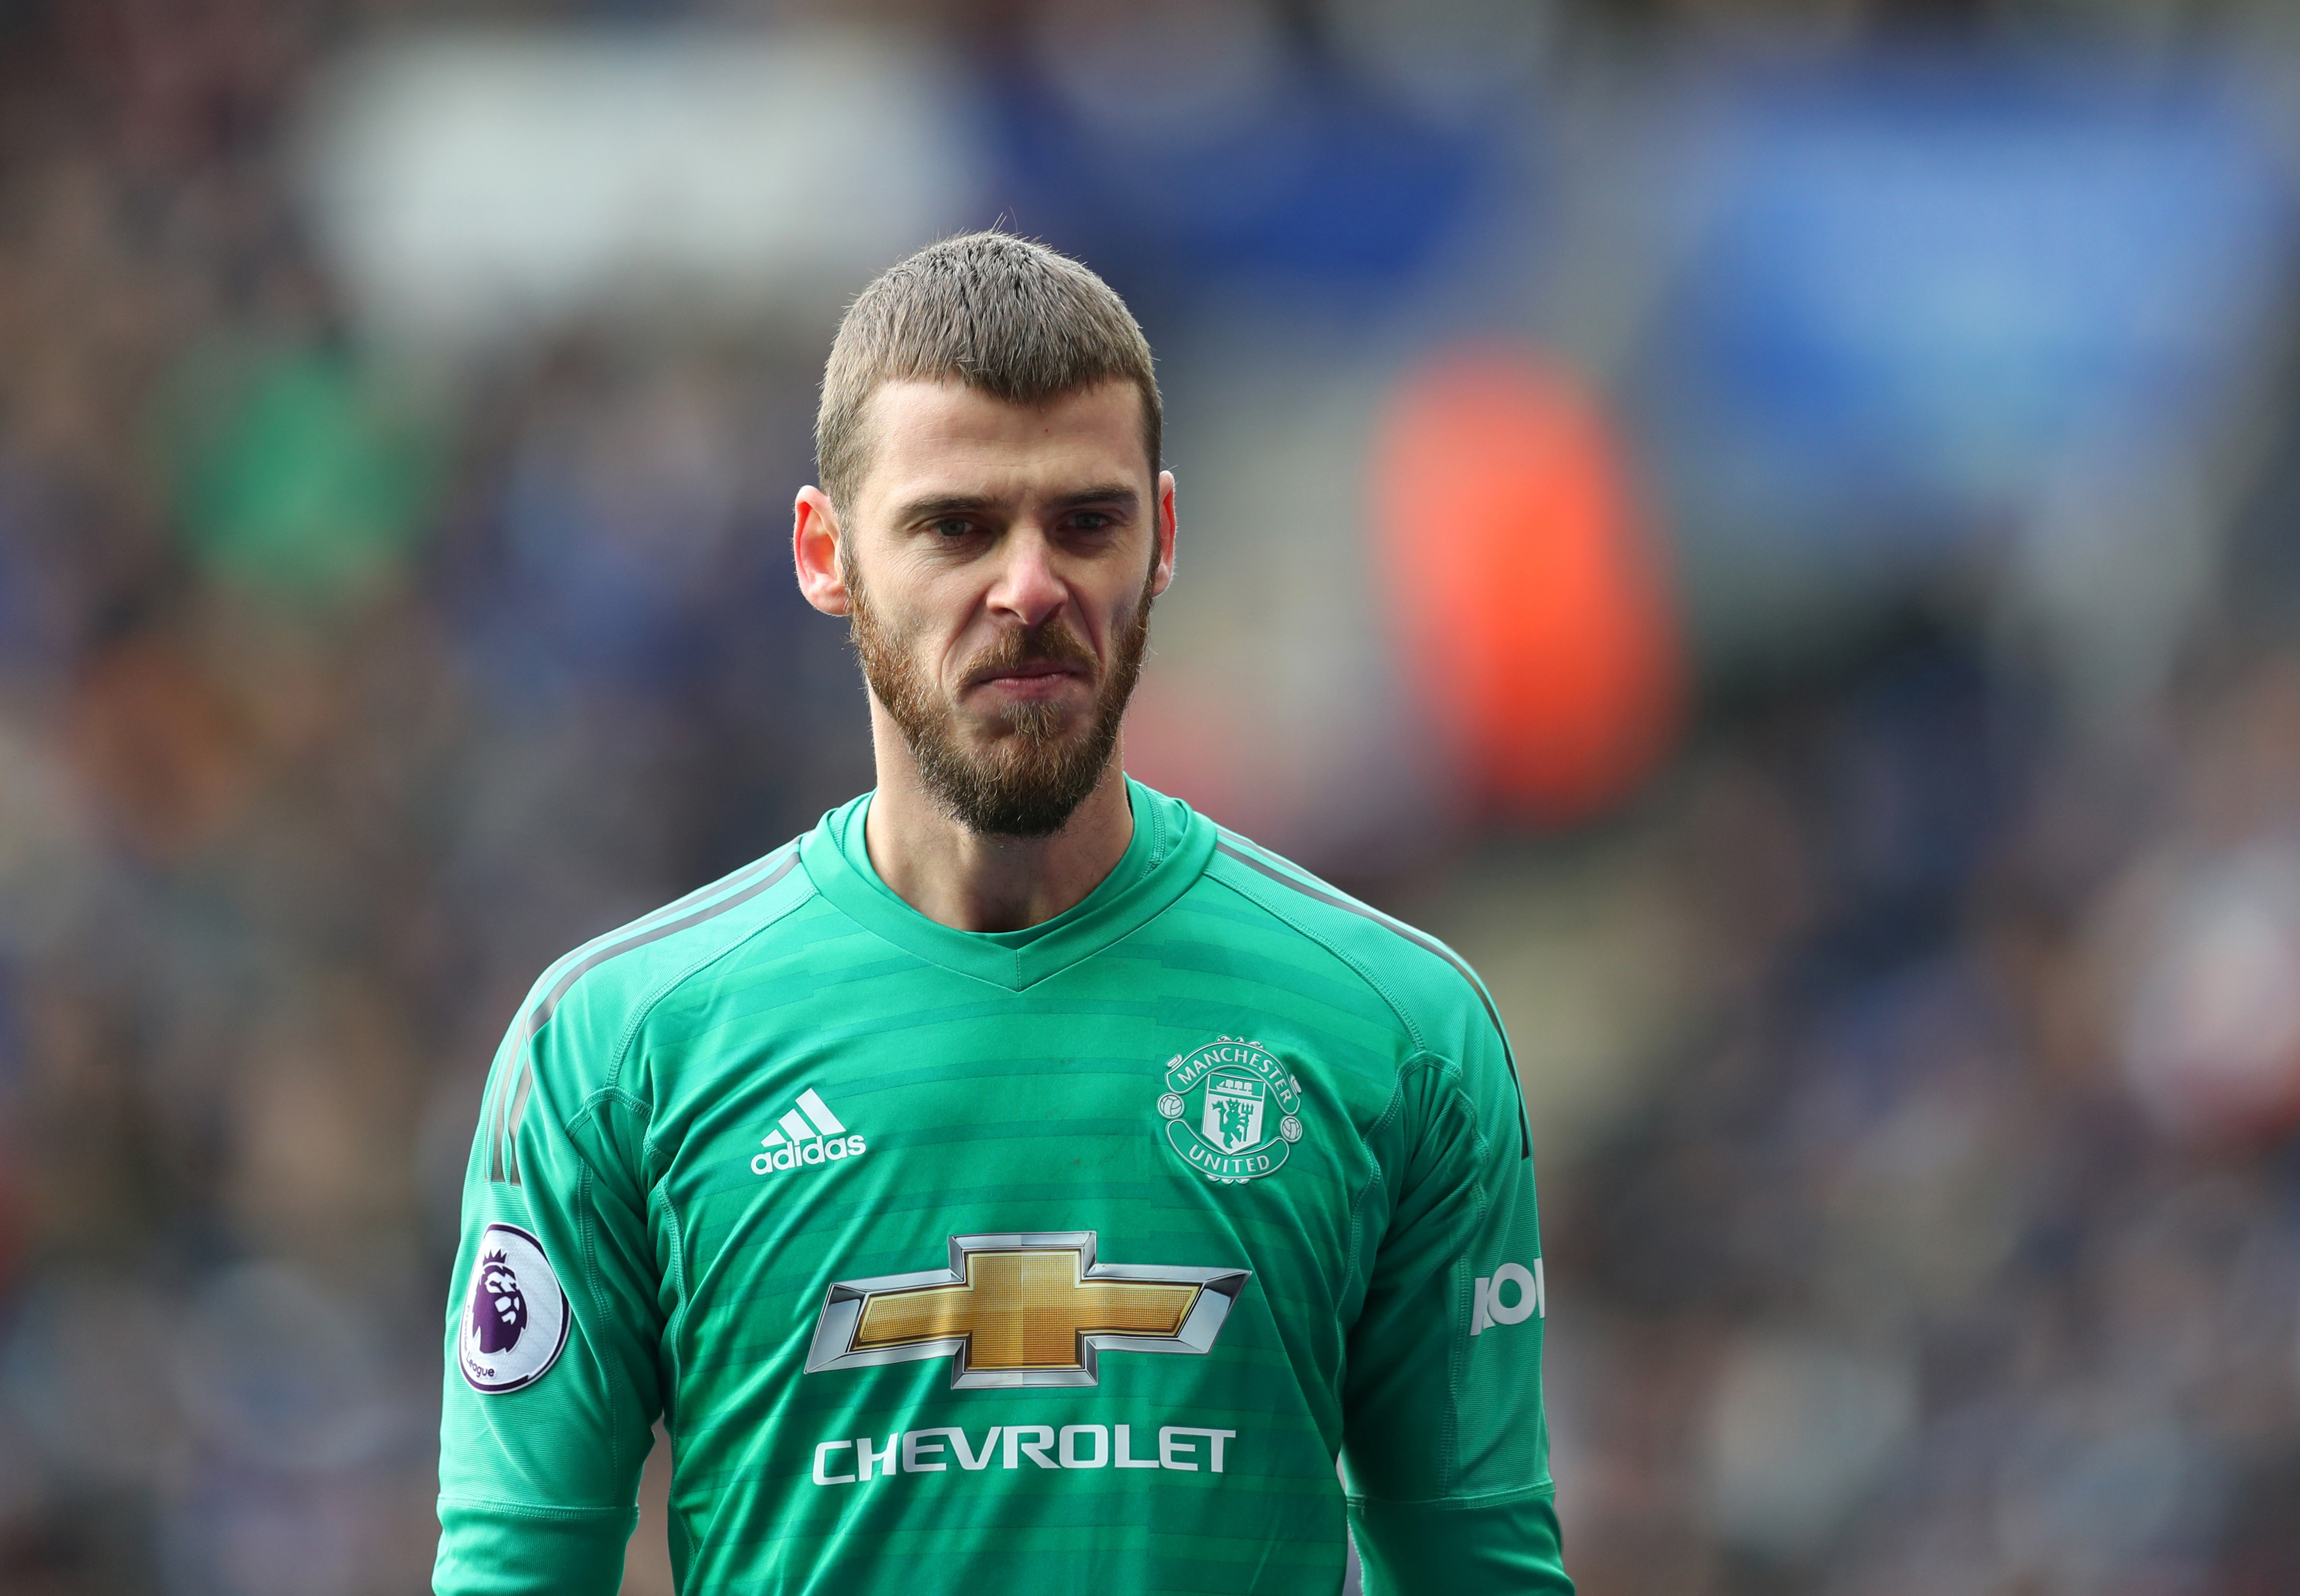 LEICESTER, ENGLAND - FEBRUARY 03: David de Gea of Manchester United  during the Premier League match between Leicester City and Manchester United at The King Power Stadium on February 03, 2019 in Leicester, United Kingdom. (Photo by Catherine Ivill/Getty Images)